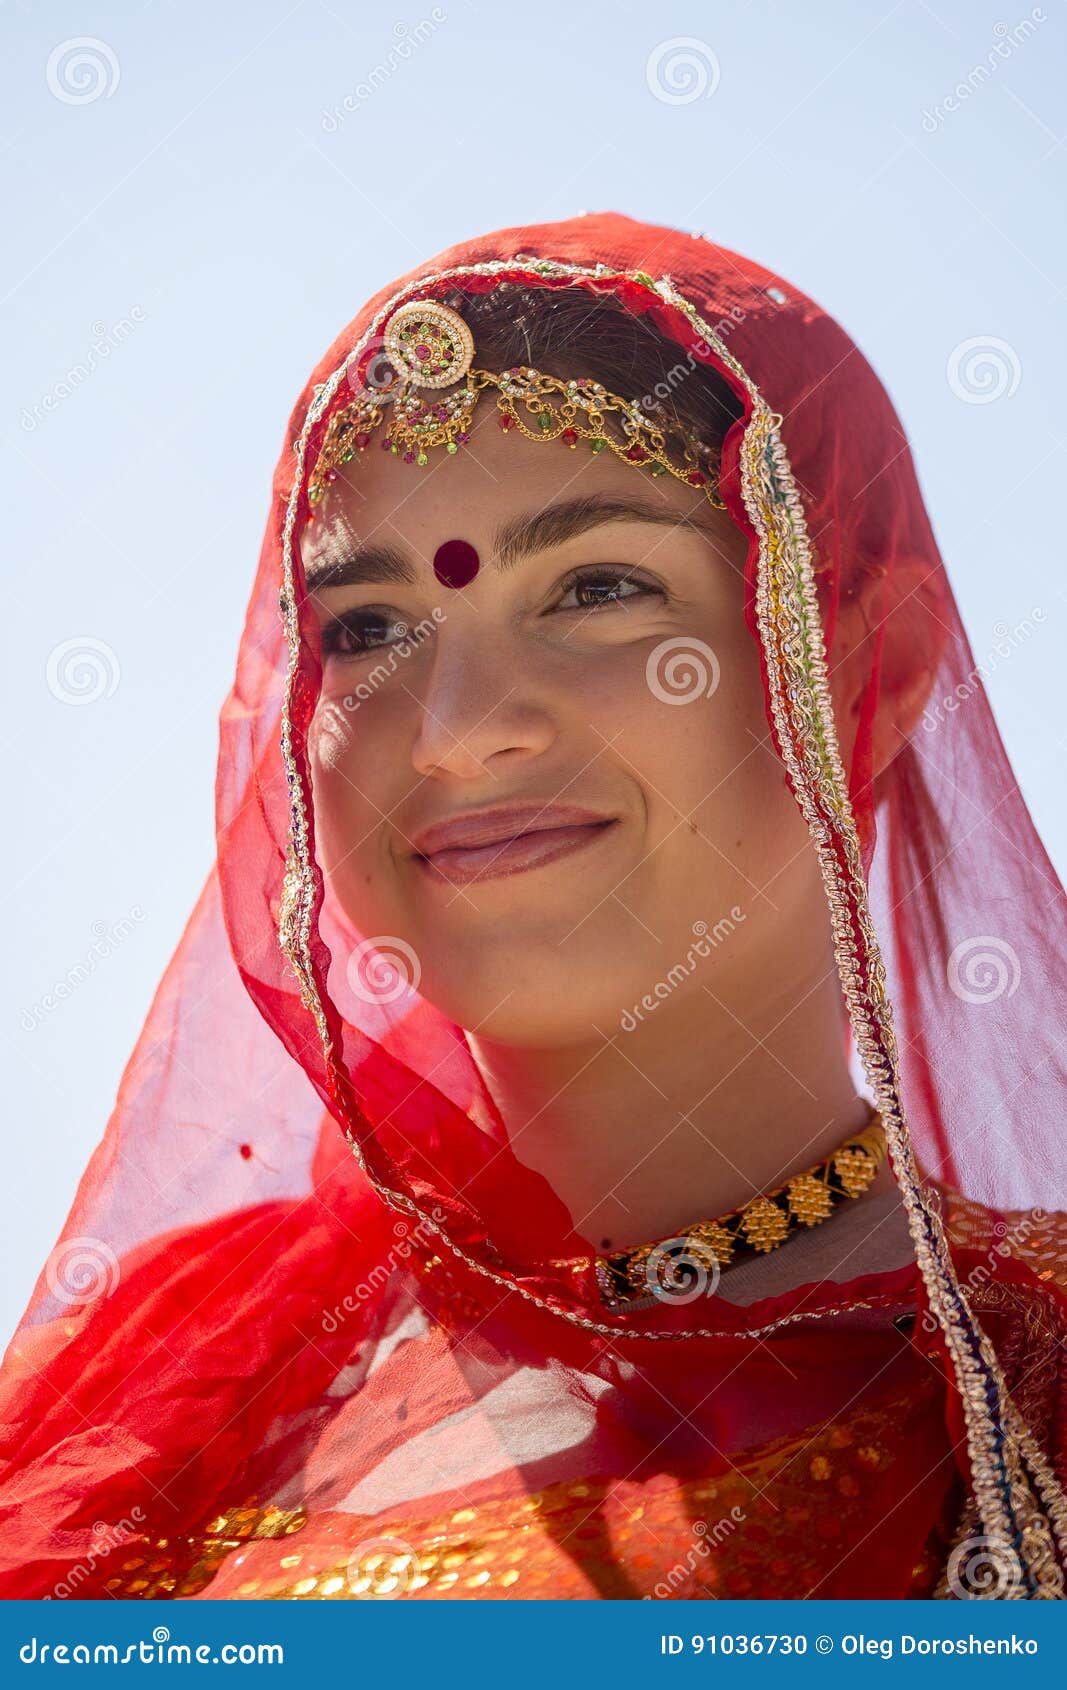 Rajasthani woman giving pose wearing traditional dress in front house  jodhapur rajasthan India..., Stock Photo, Picture And Rights Managed Image.  Pic. DPA-MSA-183782 | agefotostock